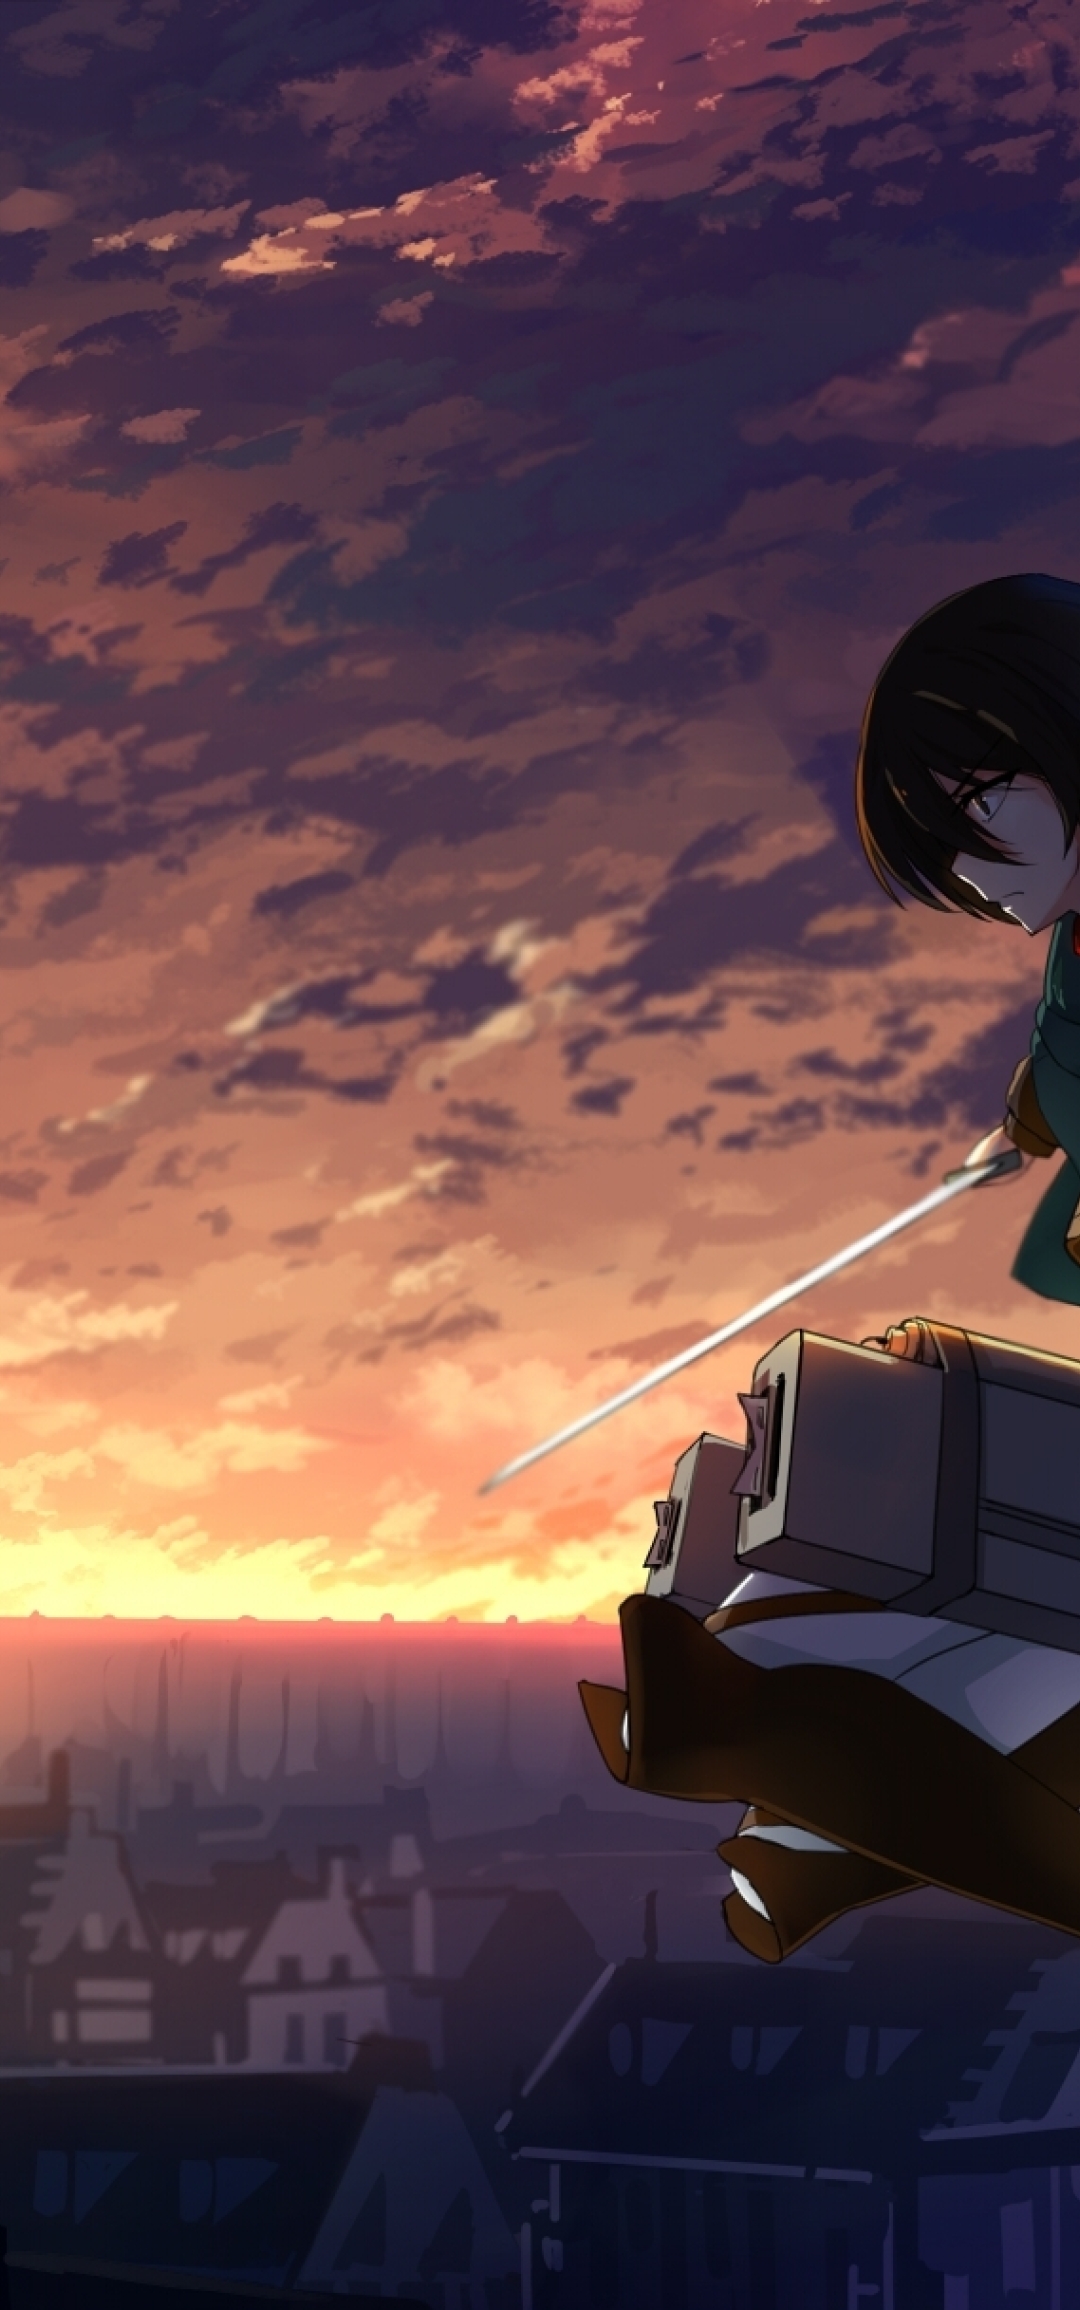 50+ Mikasa Ackerman Wallpapers for iPhone and Android by Chelsea Reed